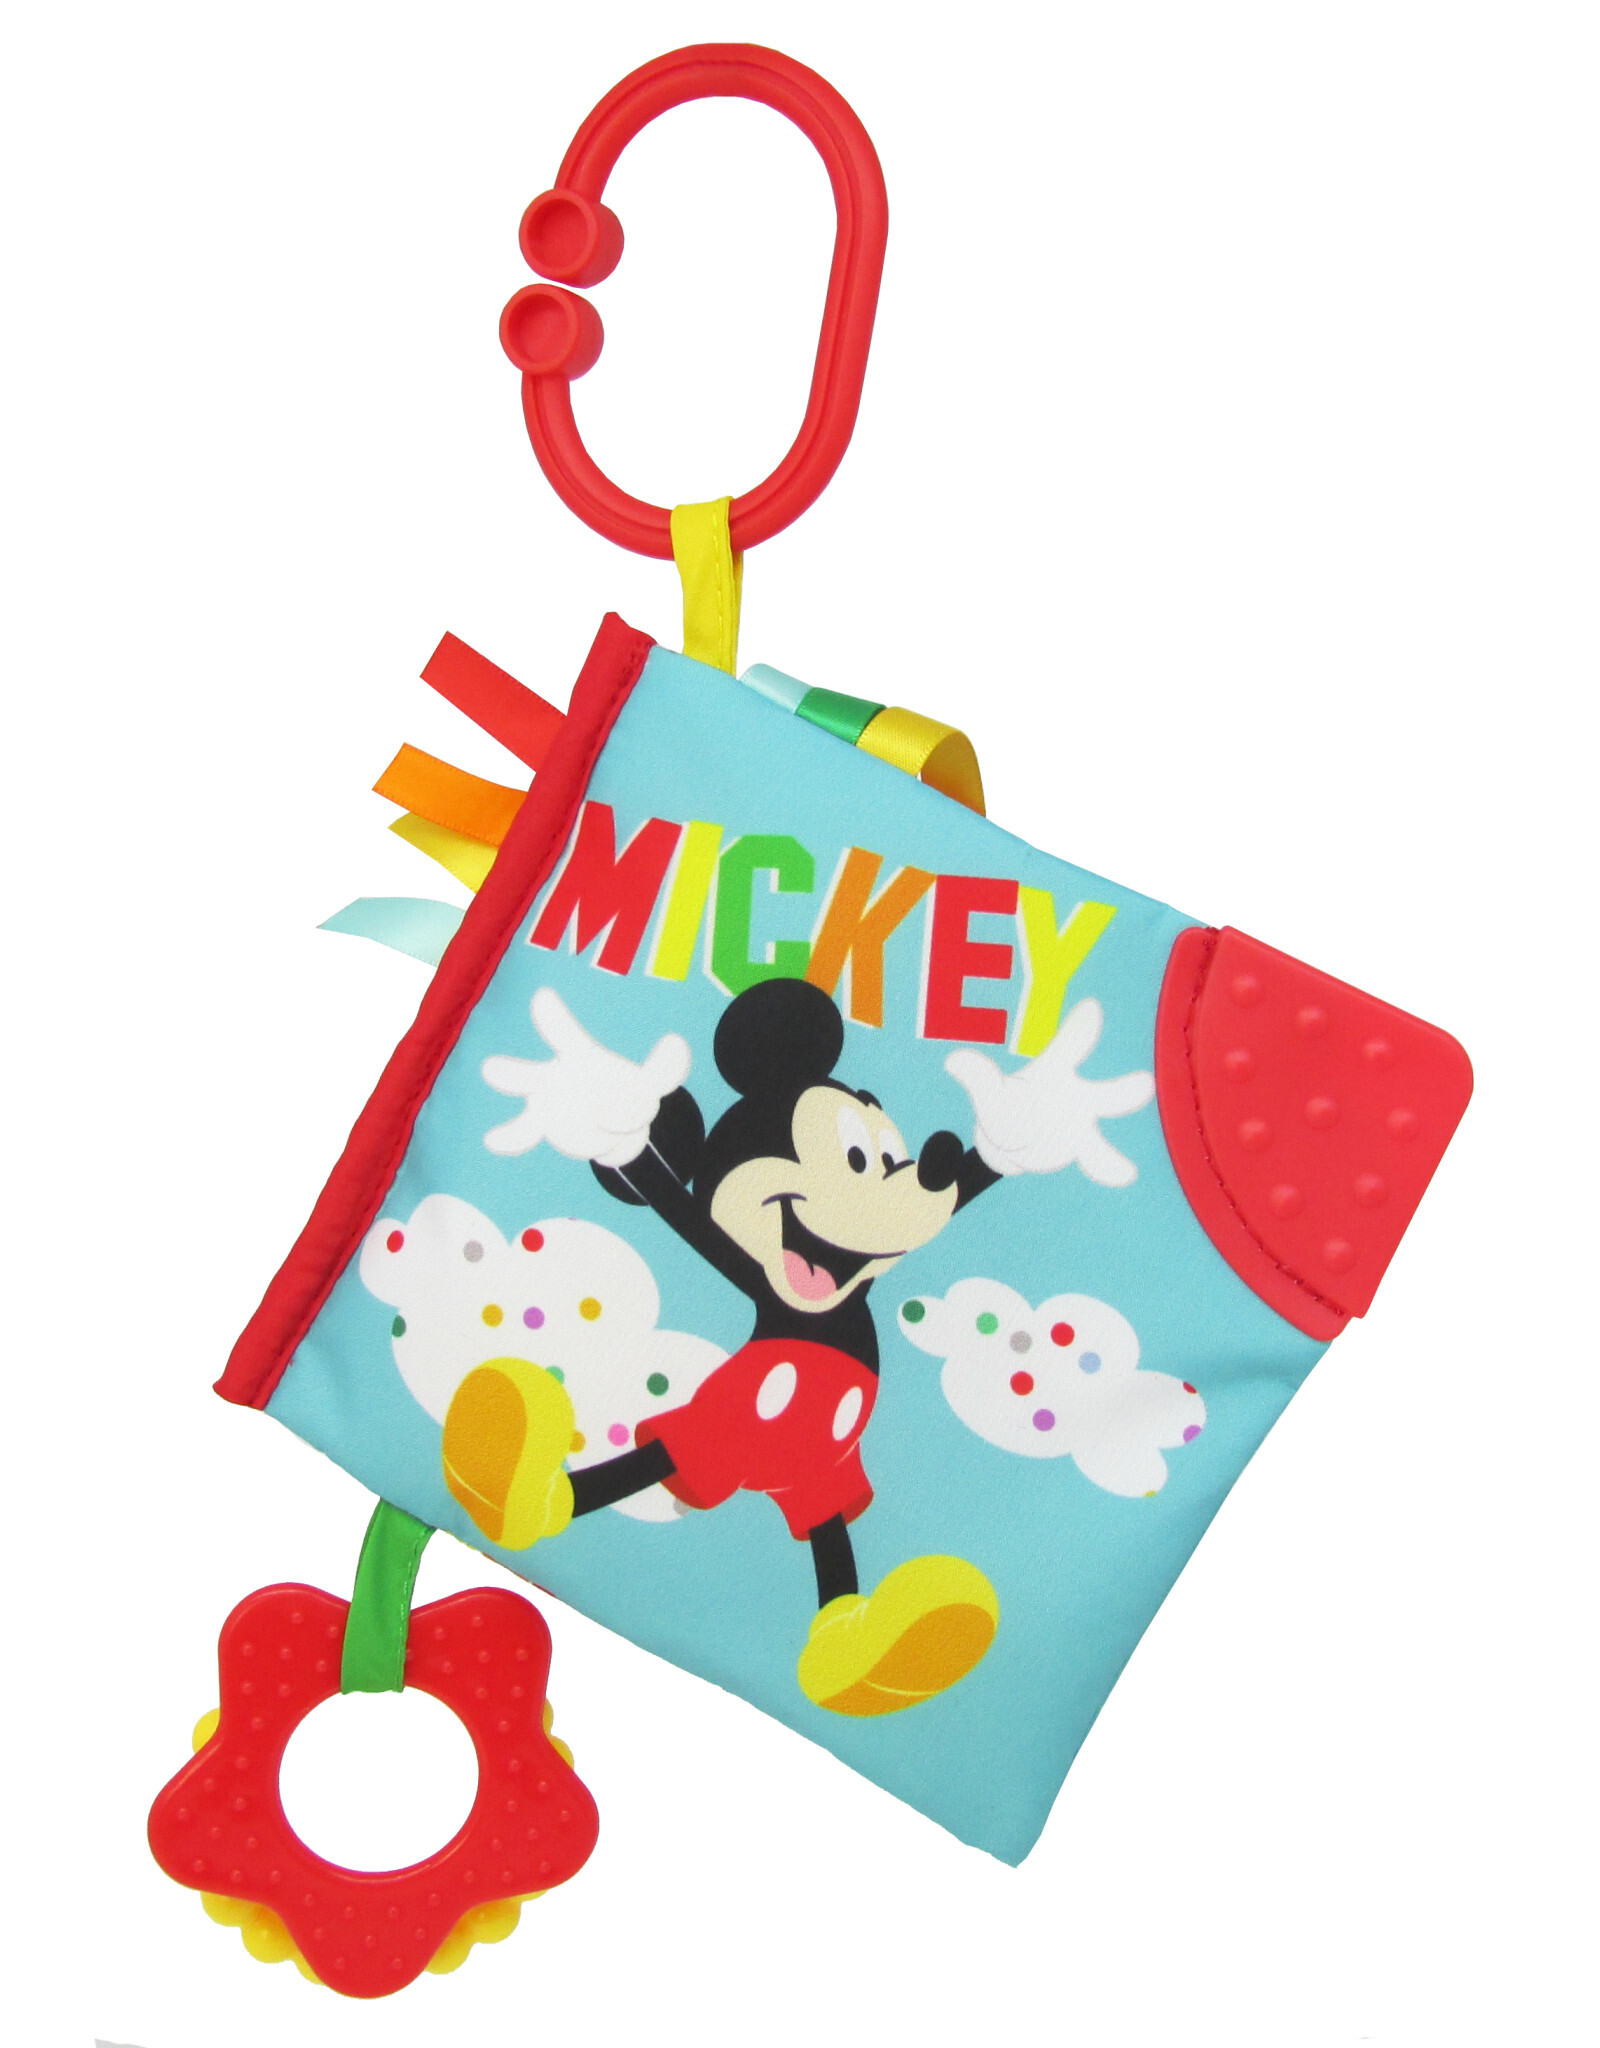 Kids Preferred MICKEY MOUSE At the Park Soft Book